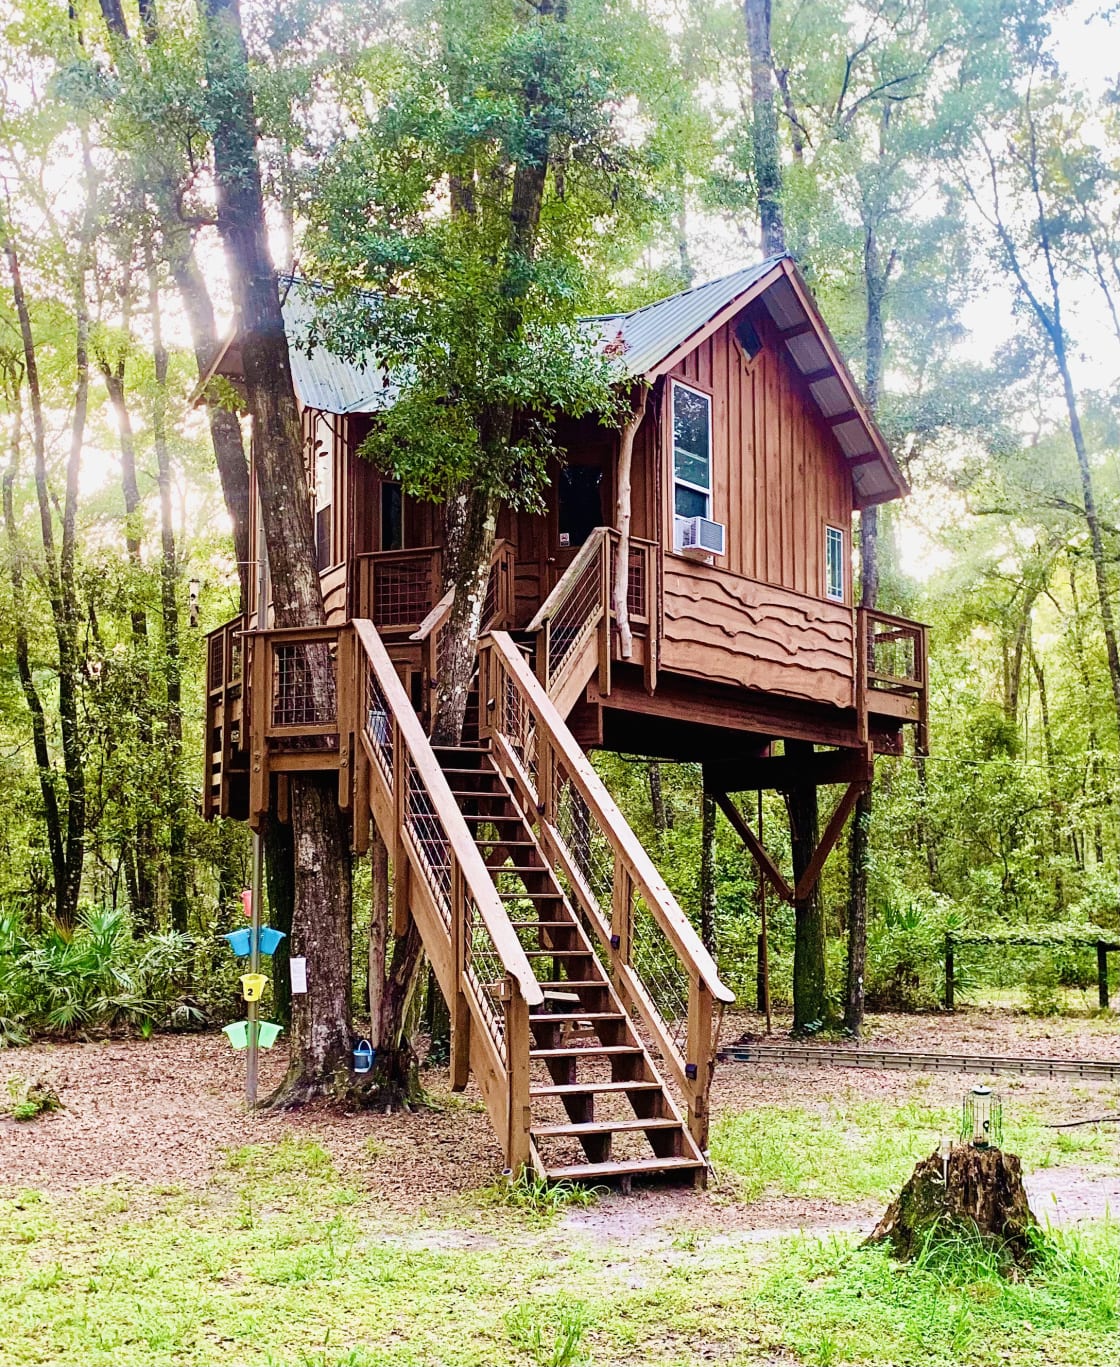 The treehouse!